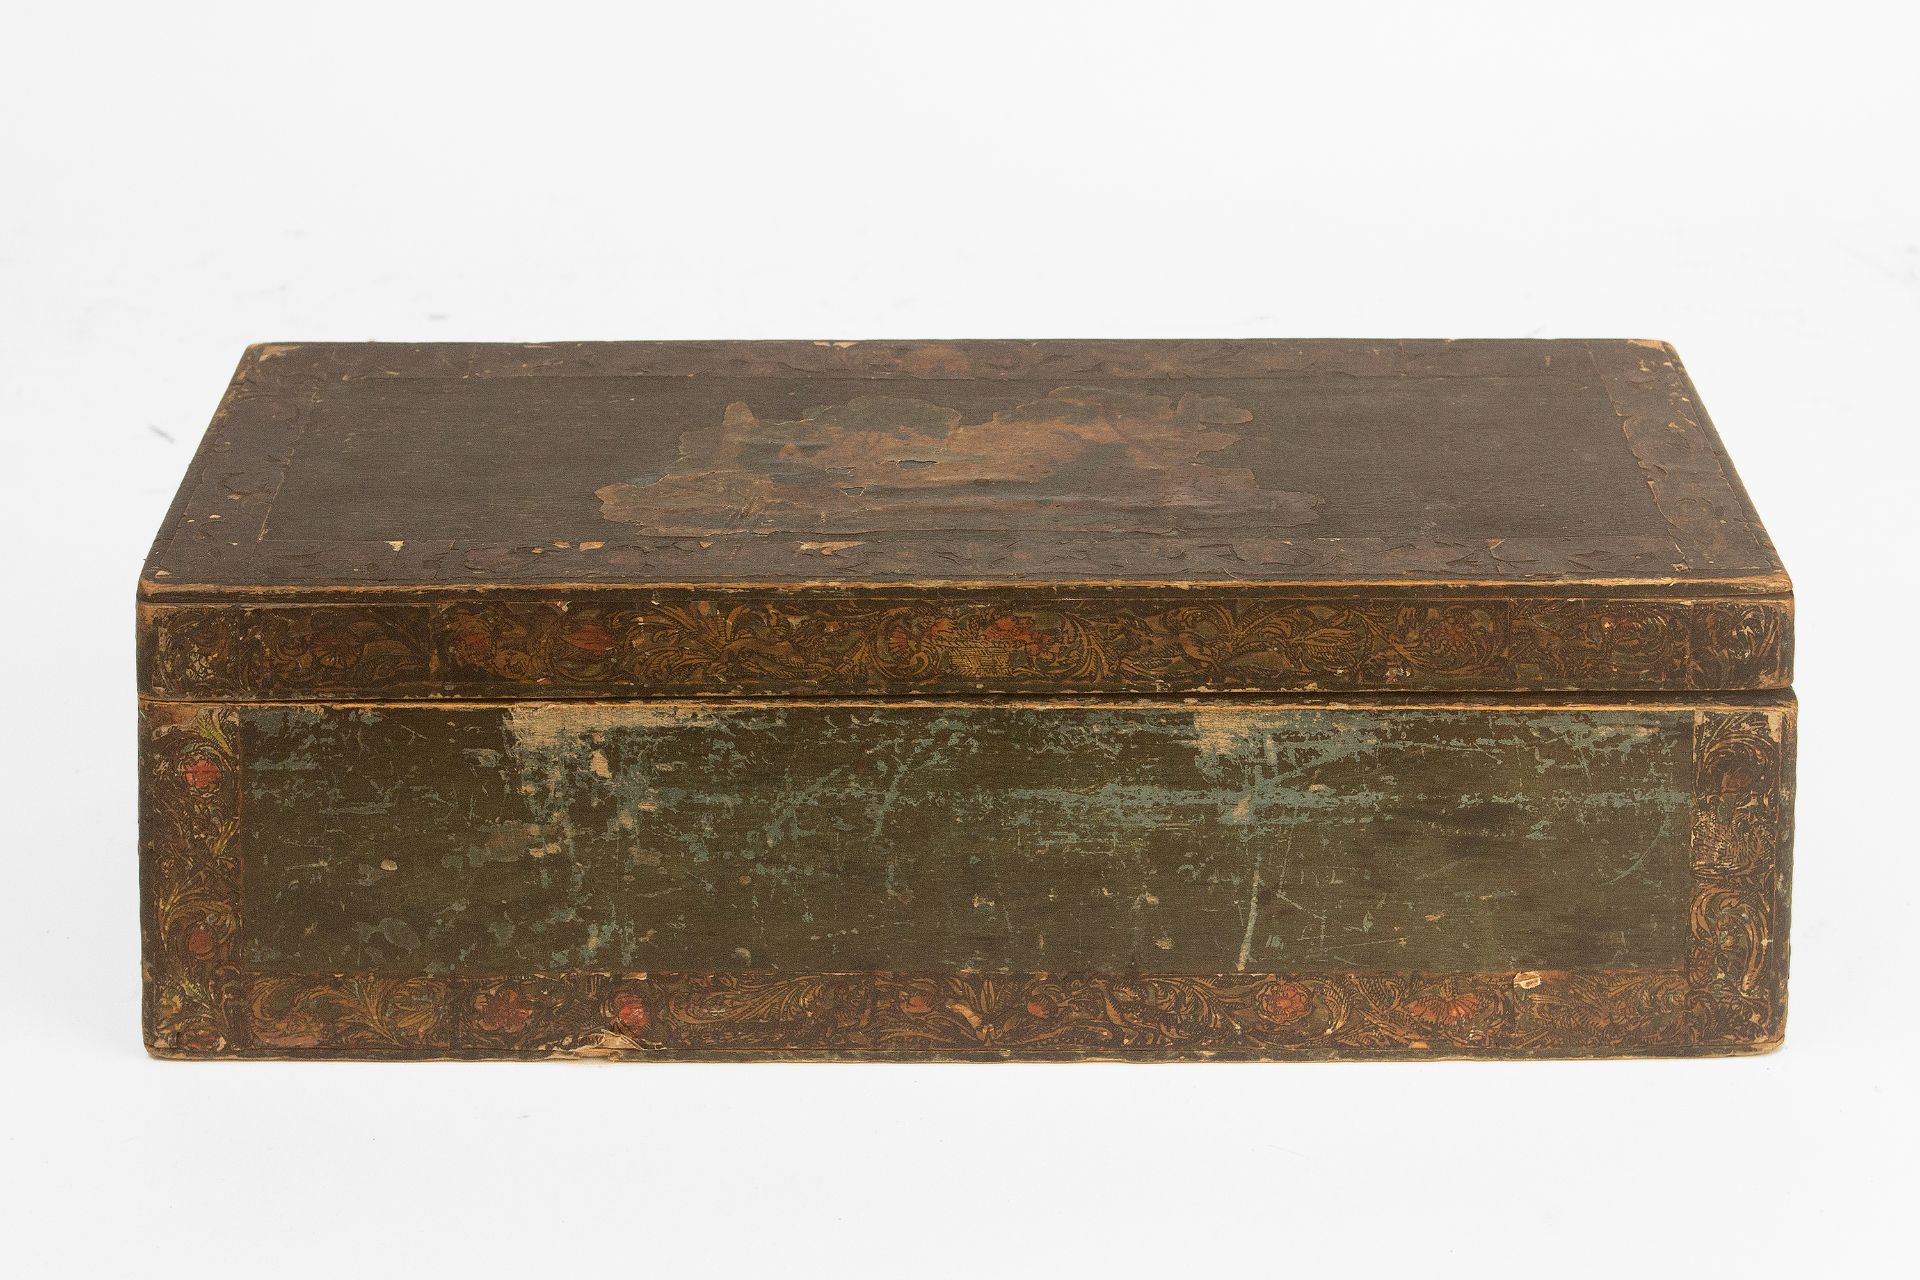 A pair of 19th century lacca povera style European boxes - Image 3 of 6